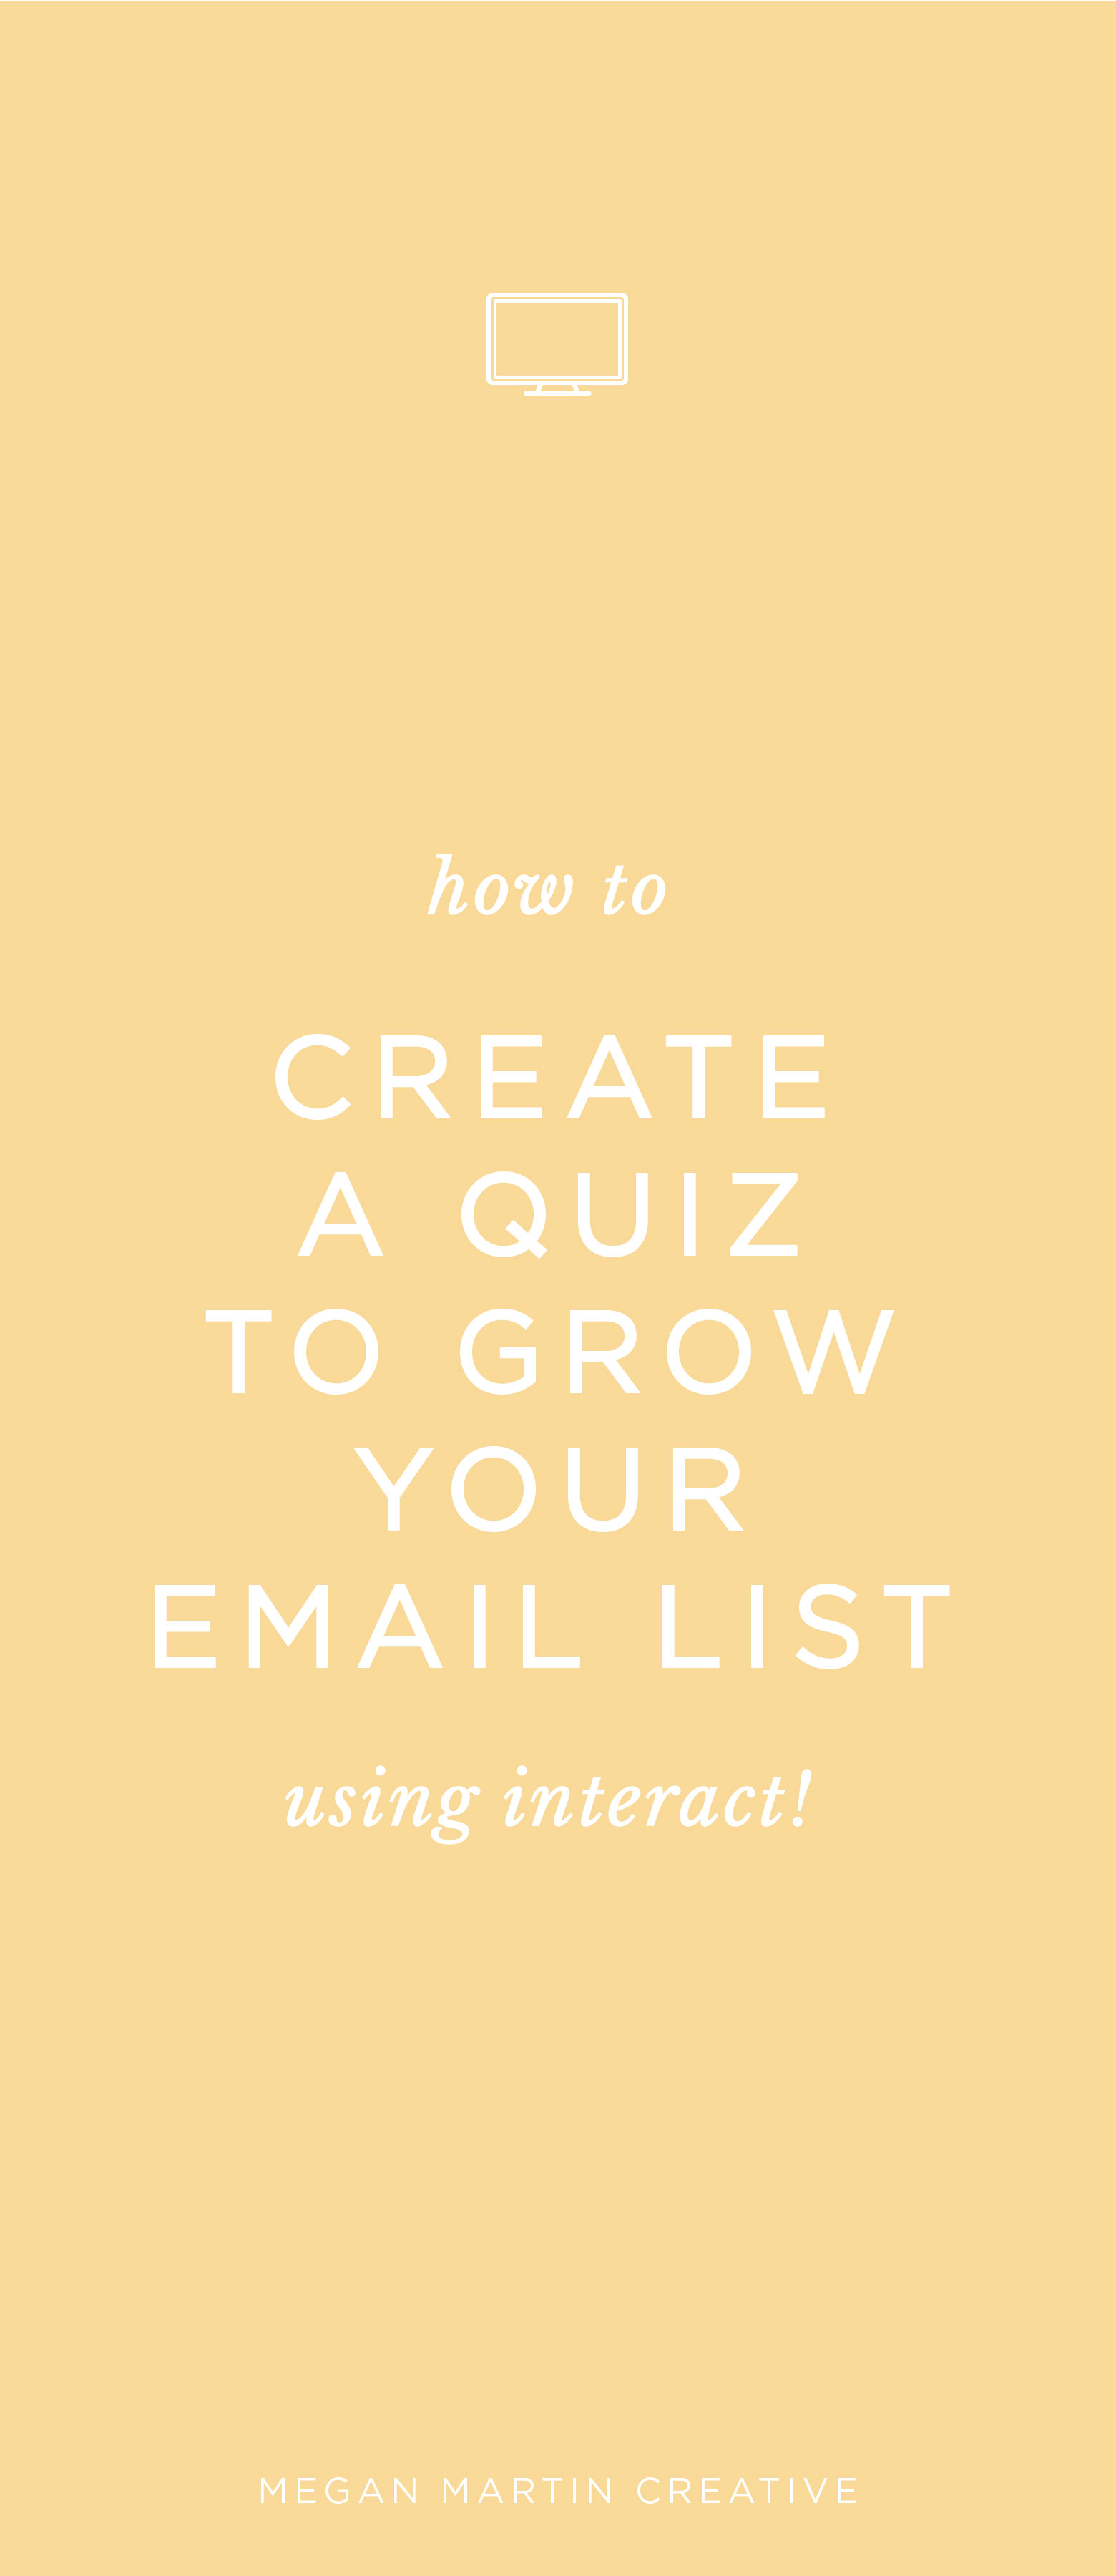 how to create a quiz with Interact to grow your email list, email marketing, opt-in, conversion, lead magnet, creative entrepreneur, sales funnel, blog, blogger